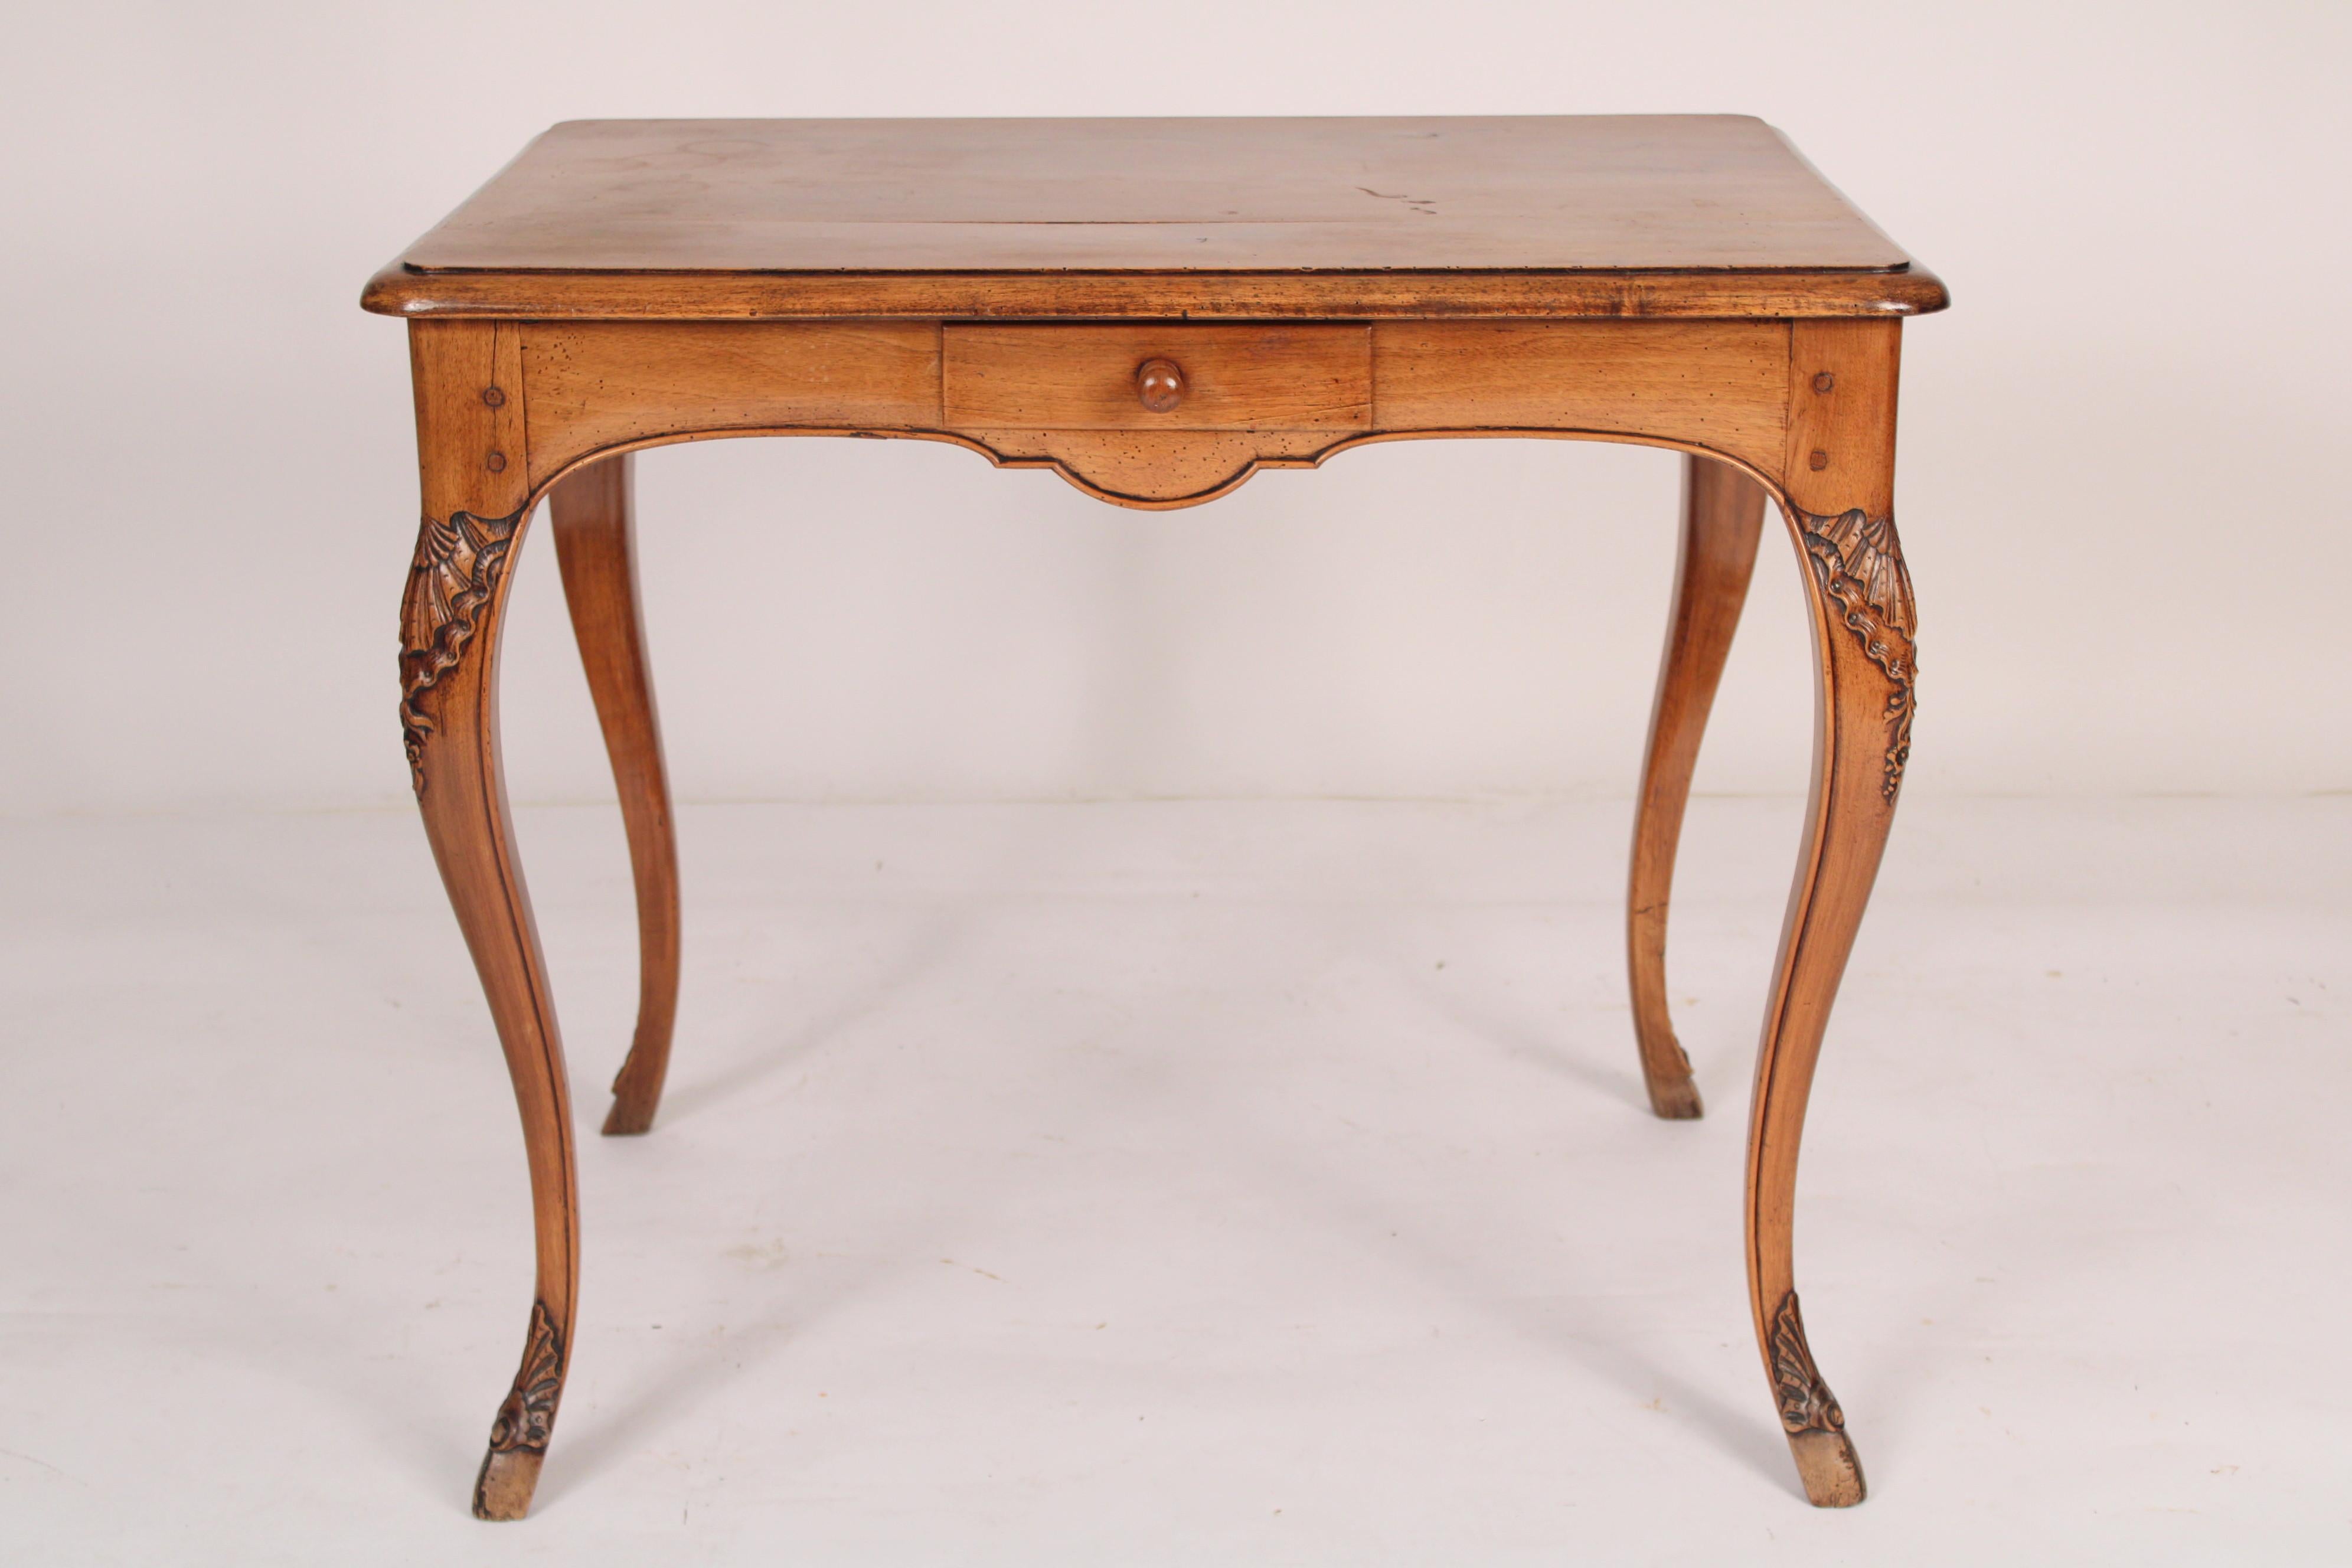 Antique Louis XV provincial walnut occasional / writing table, 19th century. With a rectangular overhanging top, serpentine shaped frieze apron with a drawer , resting on finely carved cabriole legs. Nice old color. Formerly sold by John Nelson